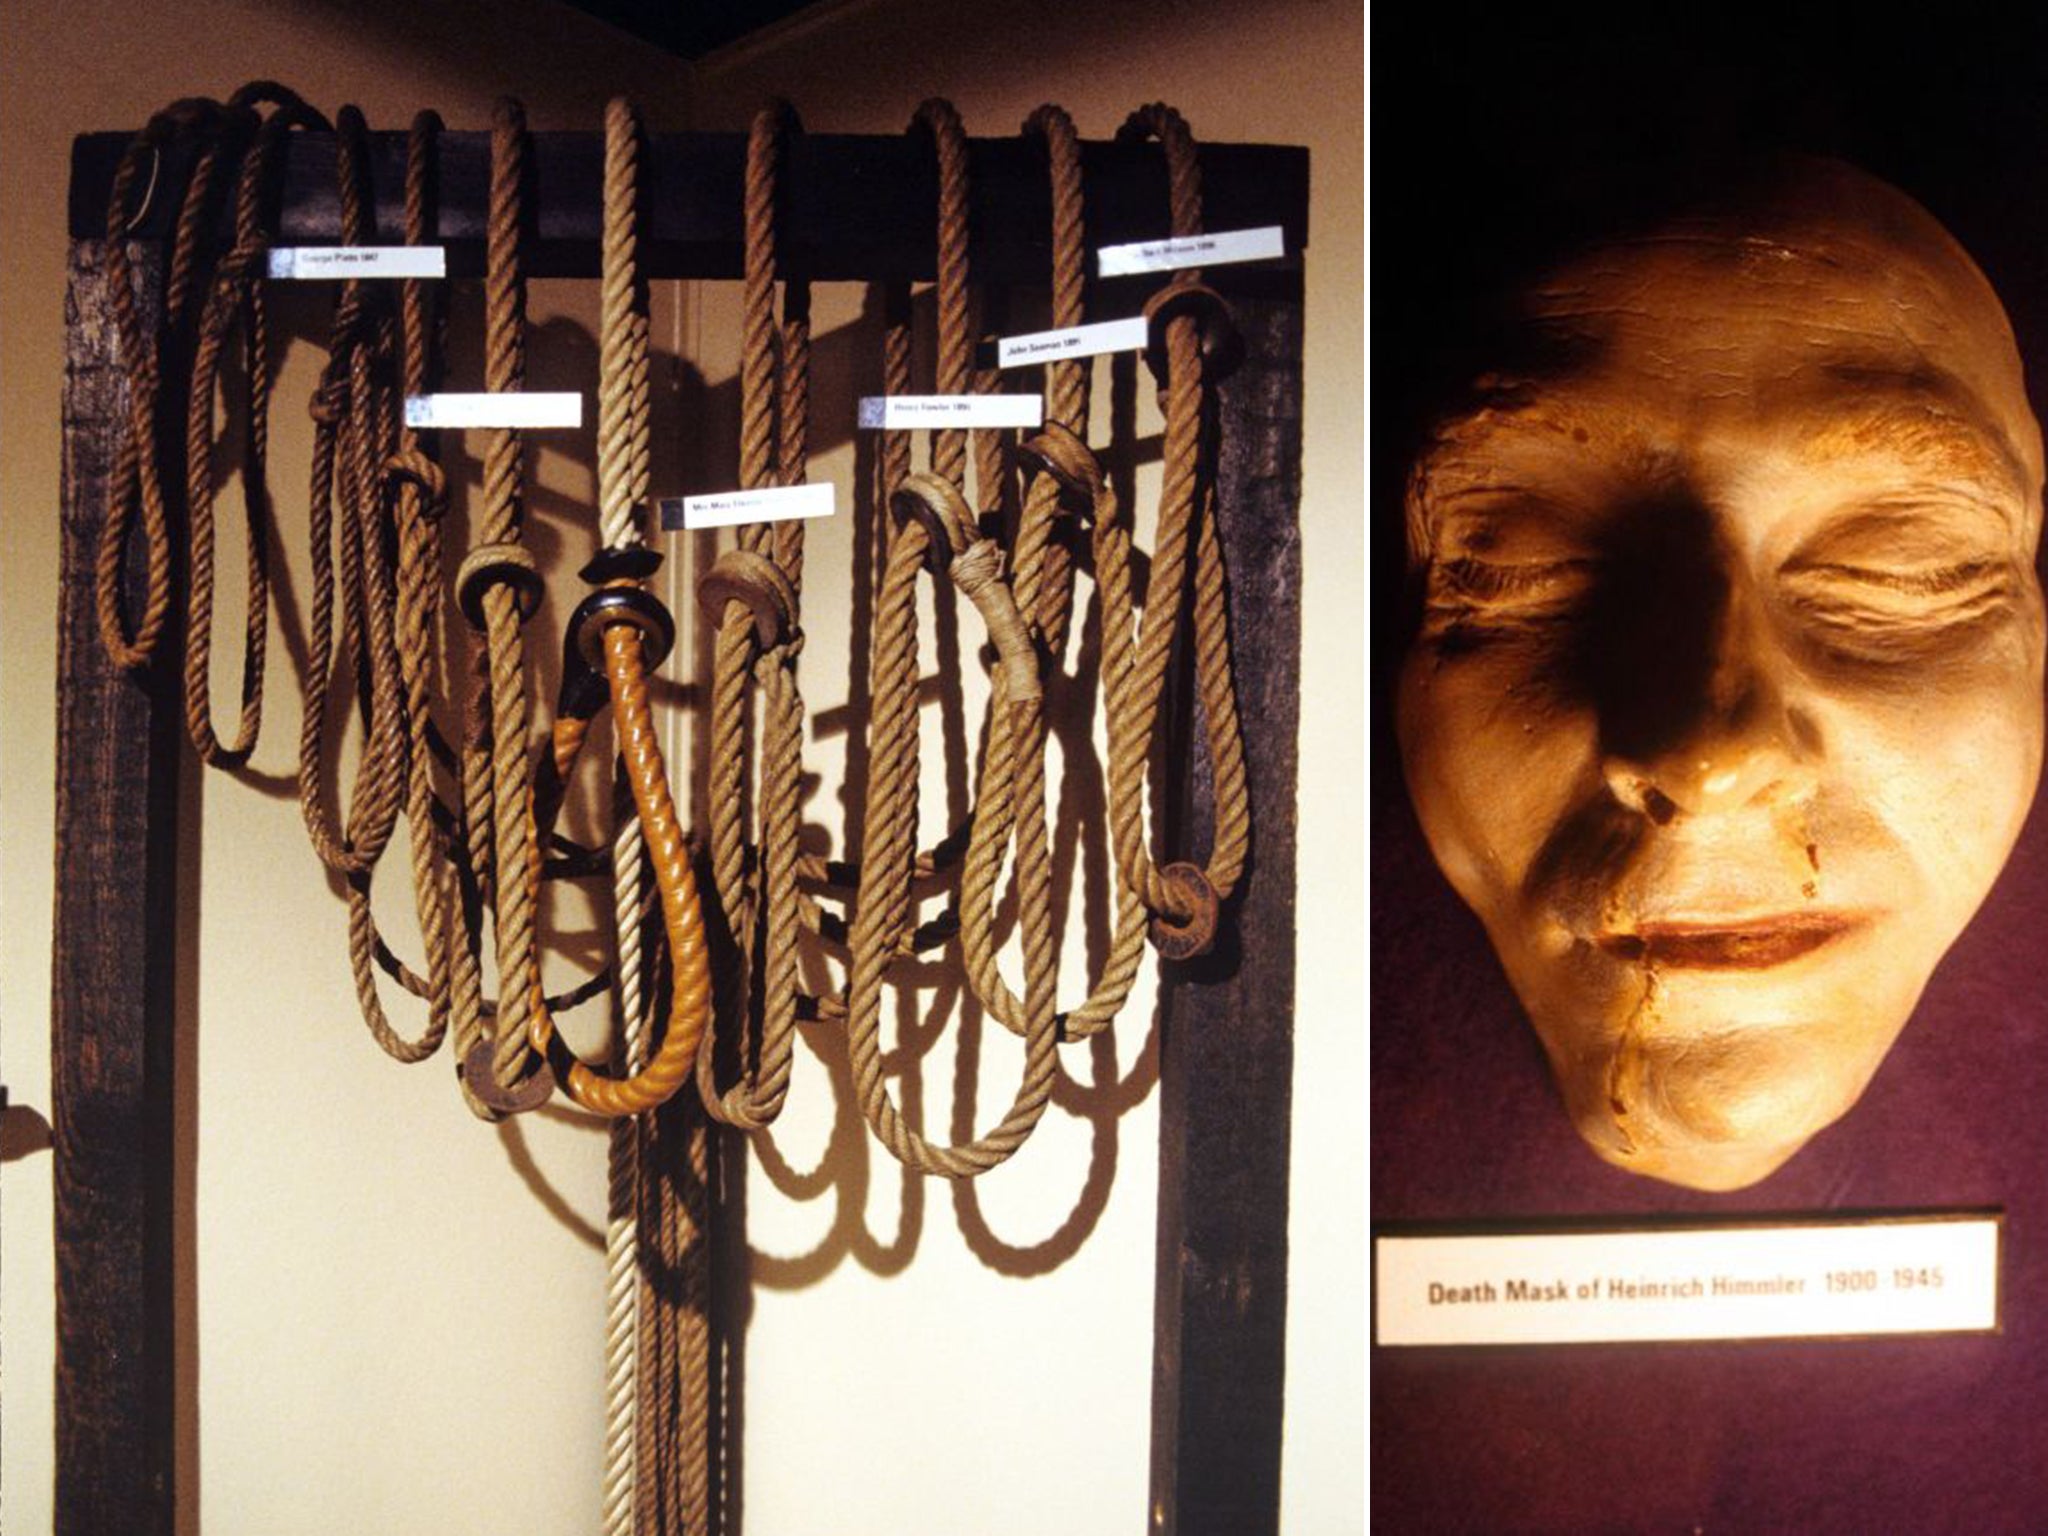 Items in the Metropolitan Police’s ‘Black Museum’ include hangman’s nooses and death masks